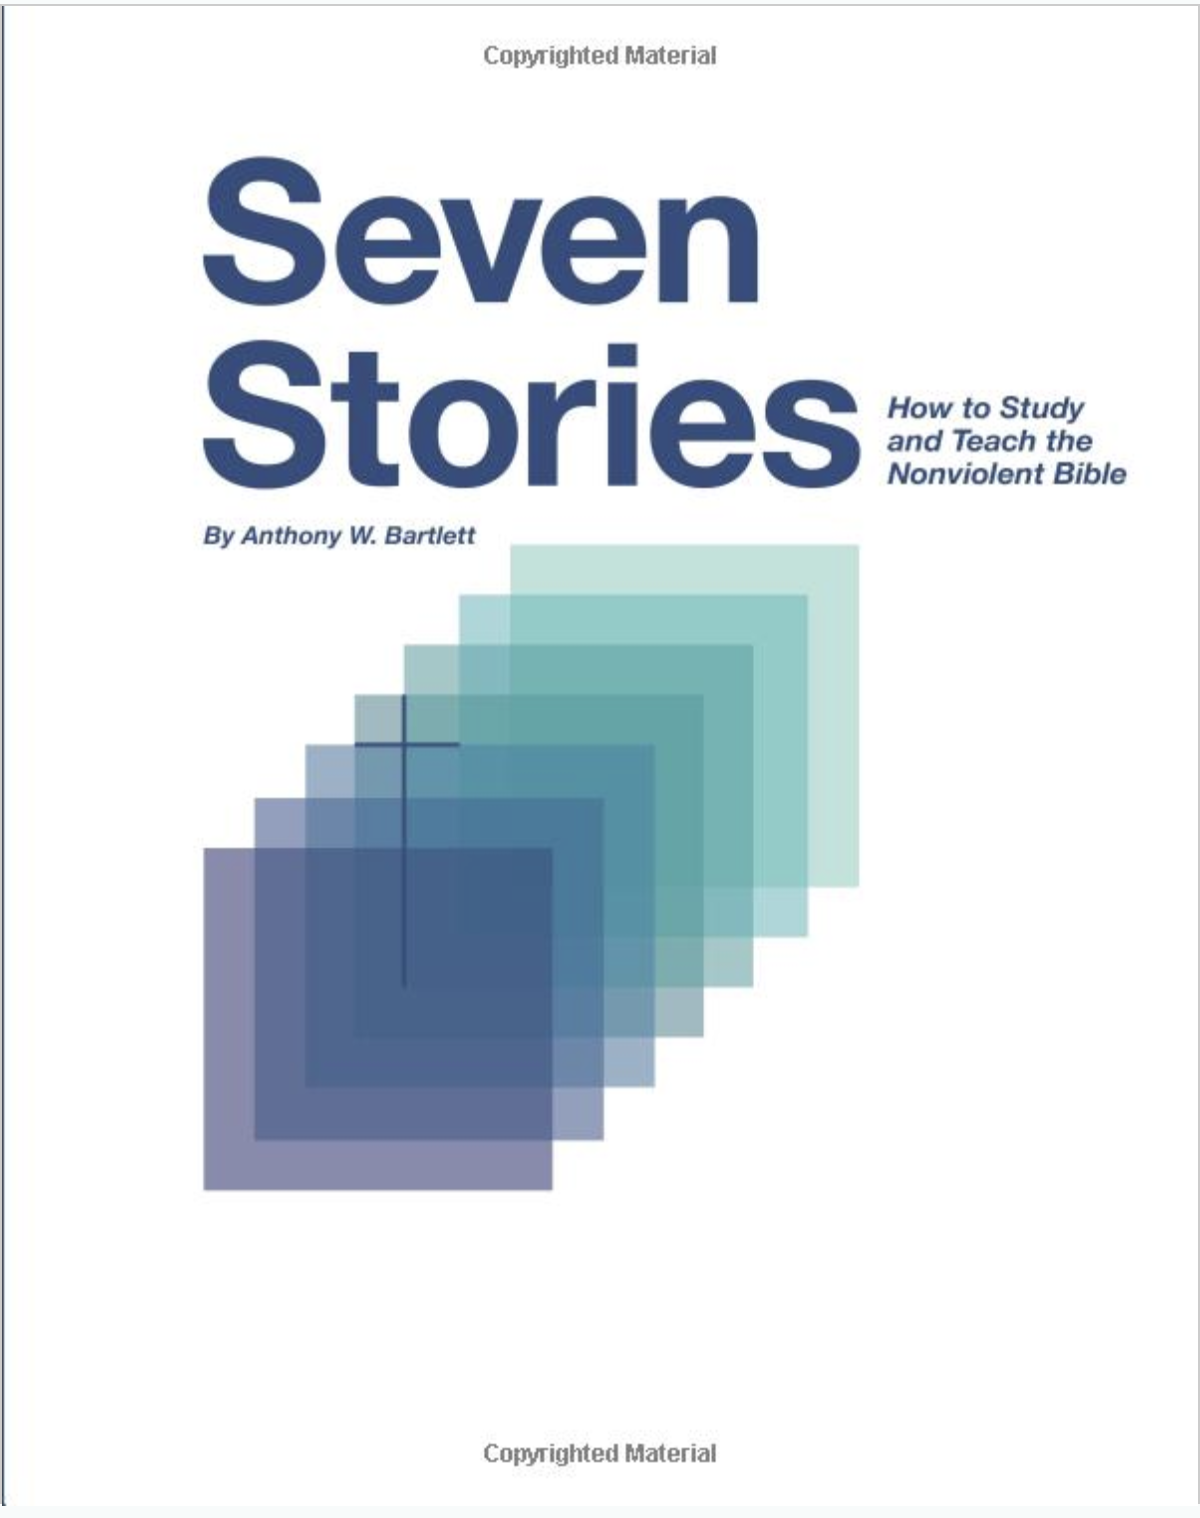 Seven Stories: How to Study and Teach the Nonviolent Bible